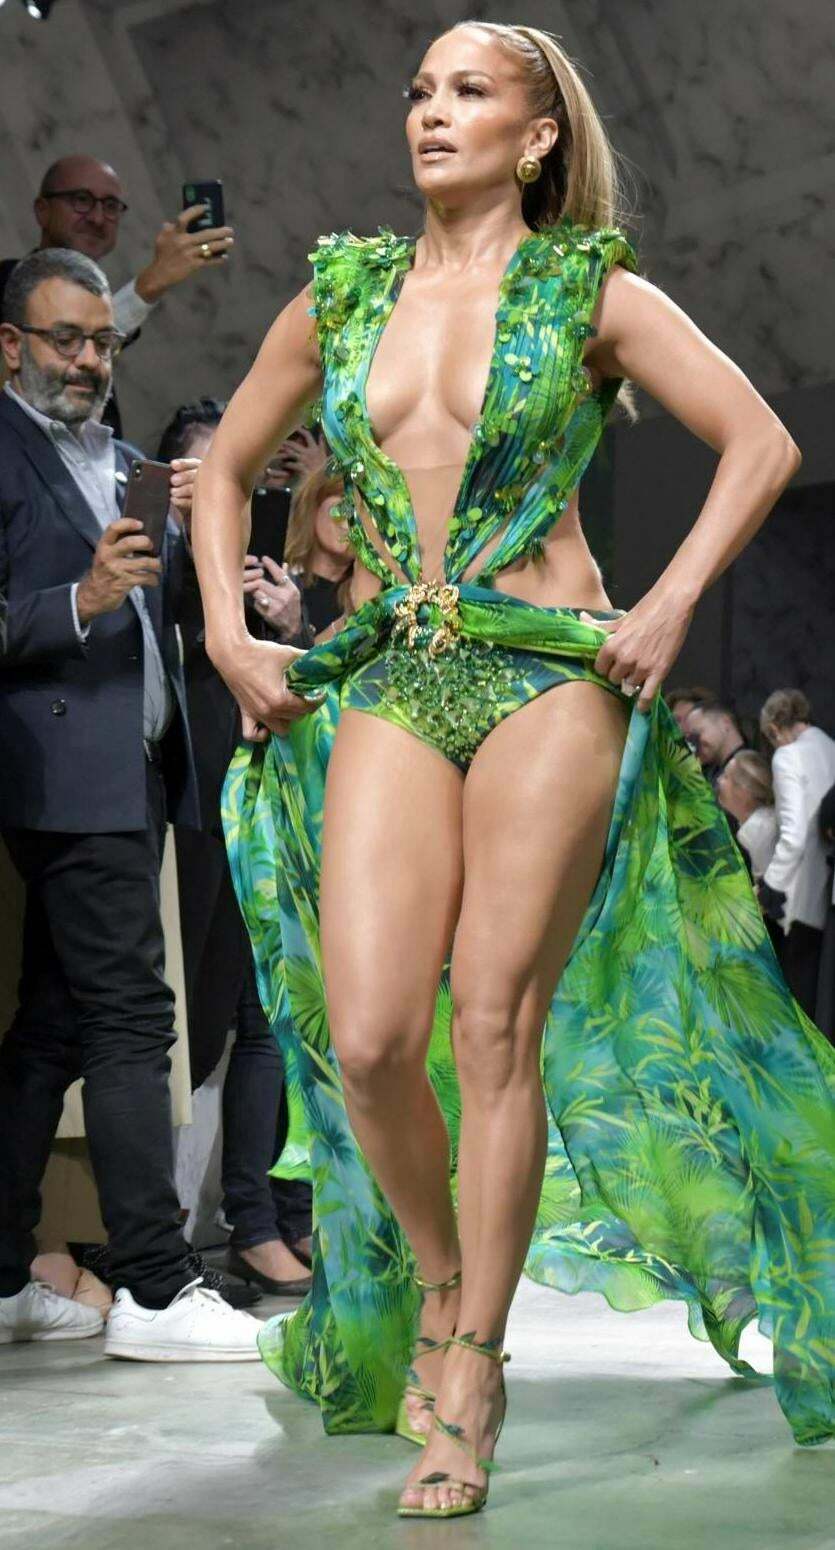 That man didn't Missed the chance to capture Jennifer Lopez ass... Surely jerked later